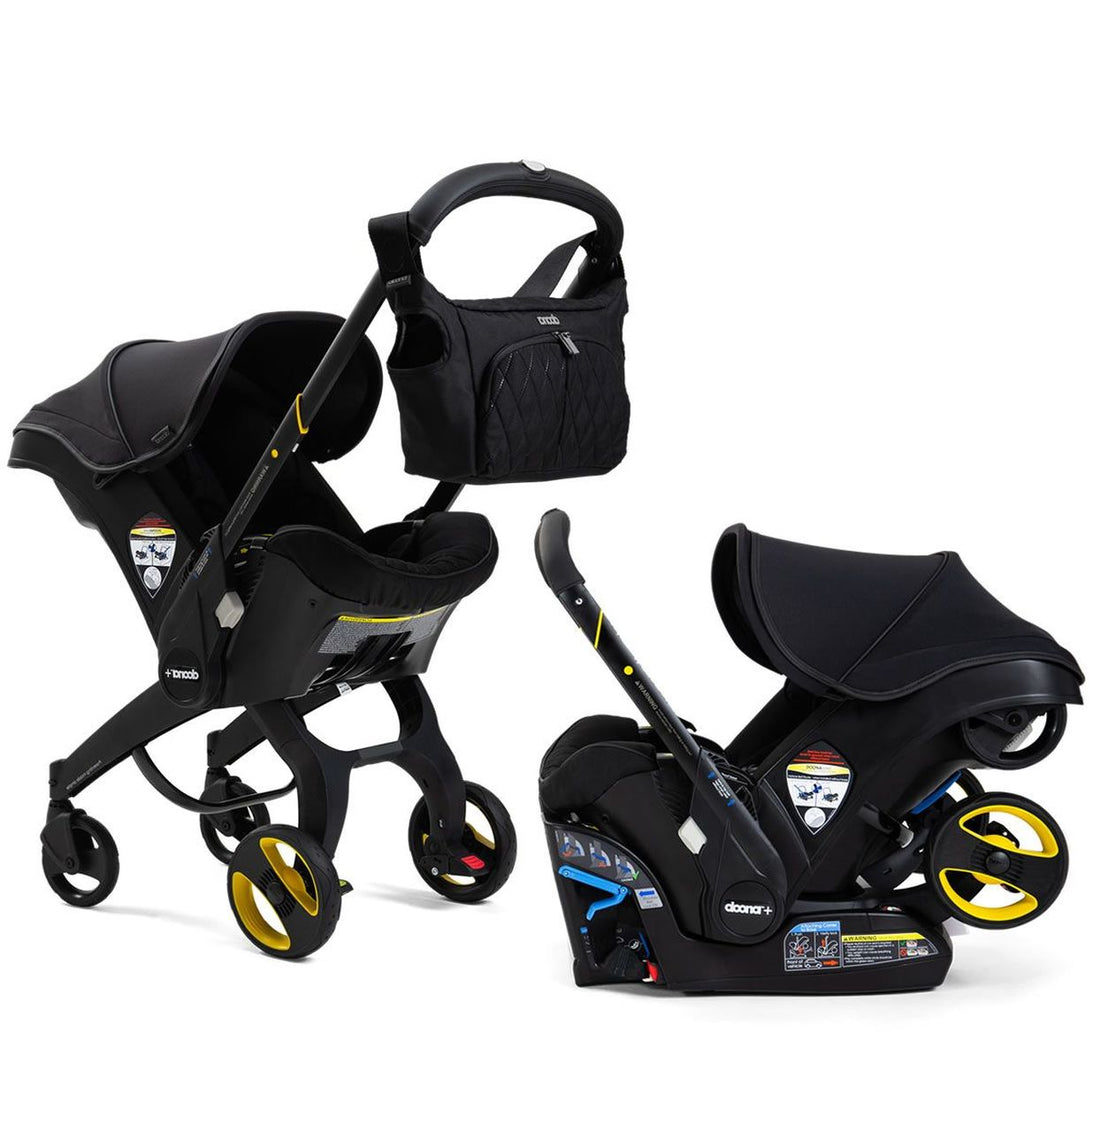 Video: Midnight Magic with the Doona Infant Car Seat and Stroller